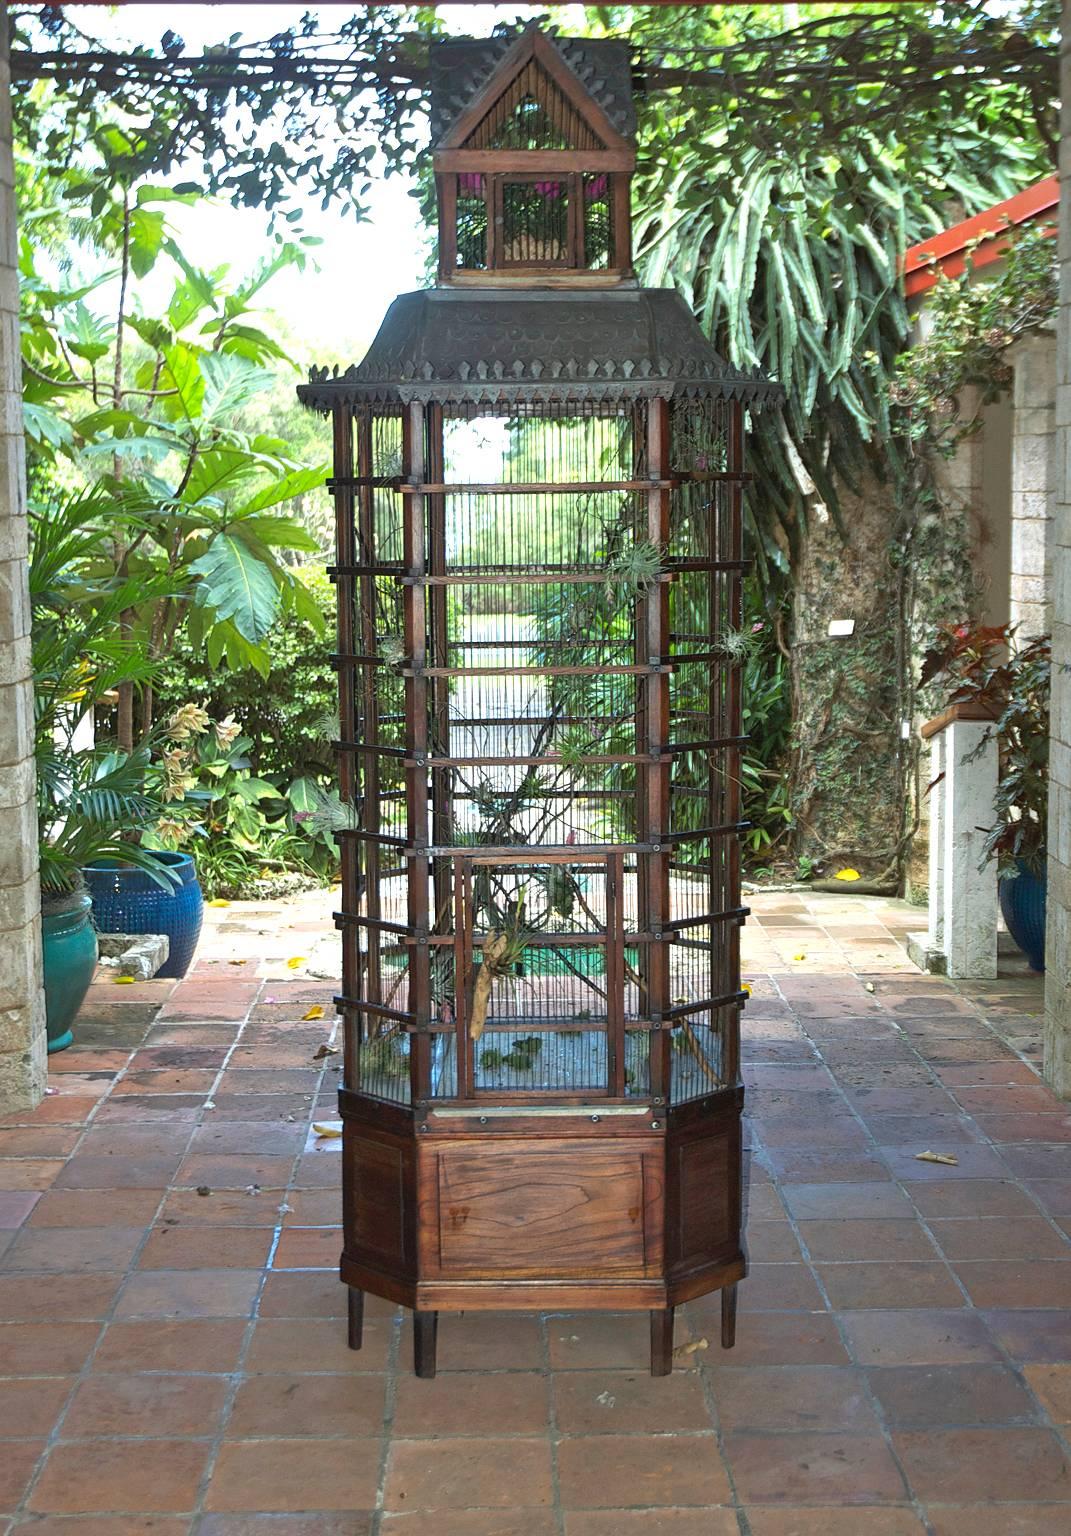 An exquisite and functional French aviary intended for use as a breeding cage, with the cupola housing a removable smaller cage for the introduction of new birds. The aviary has a teakwood frame with steel bars and a galvanized metal roof, and may